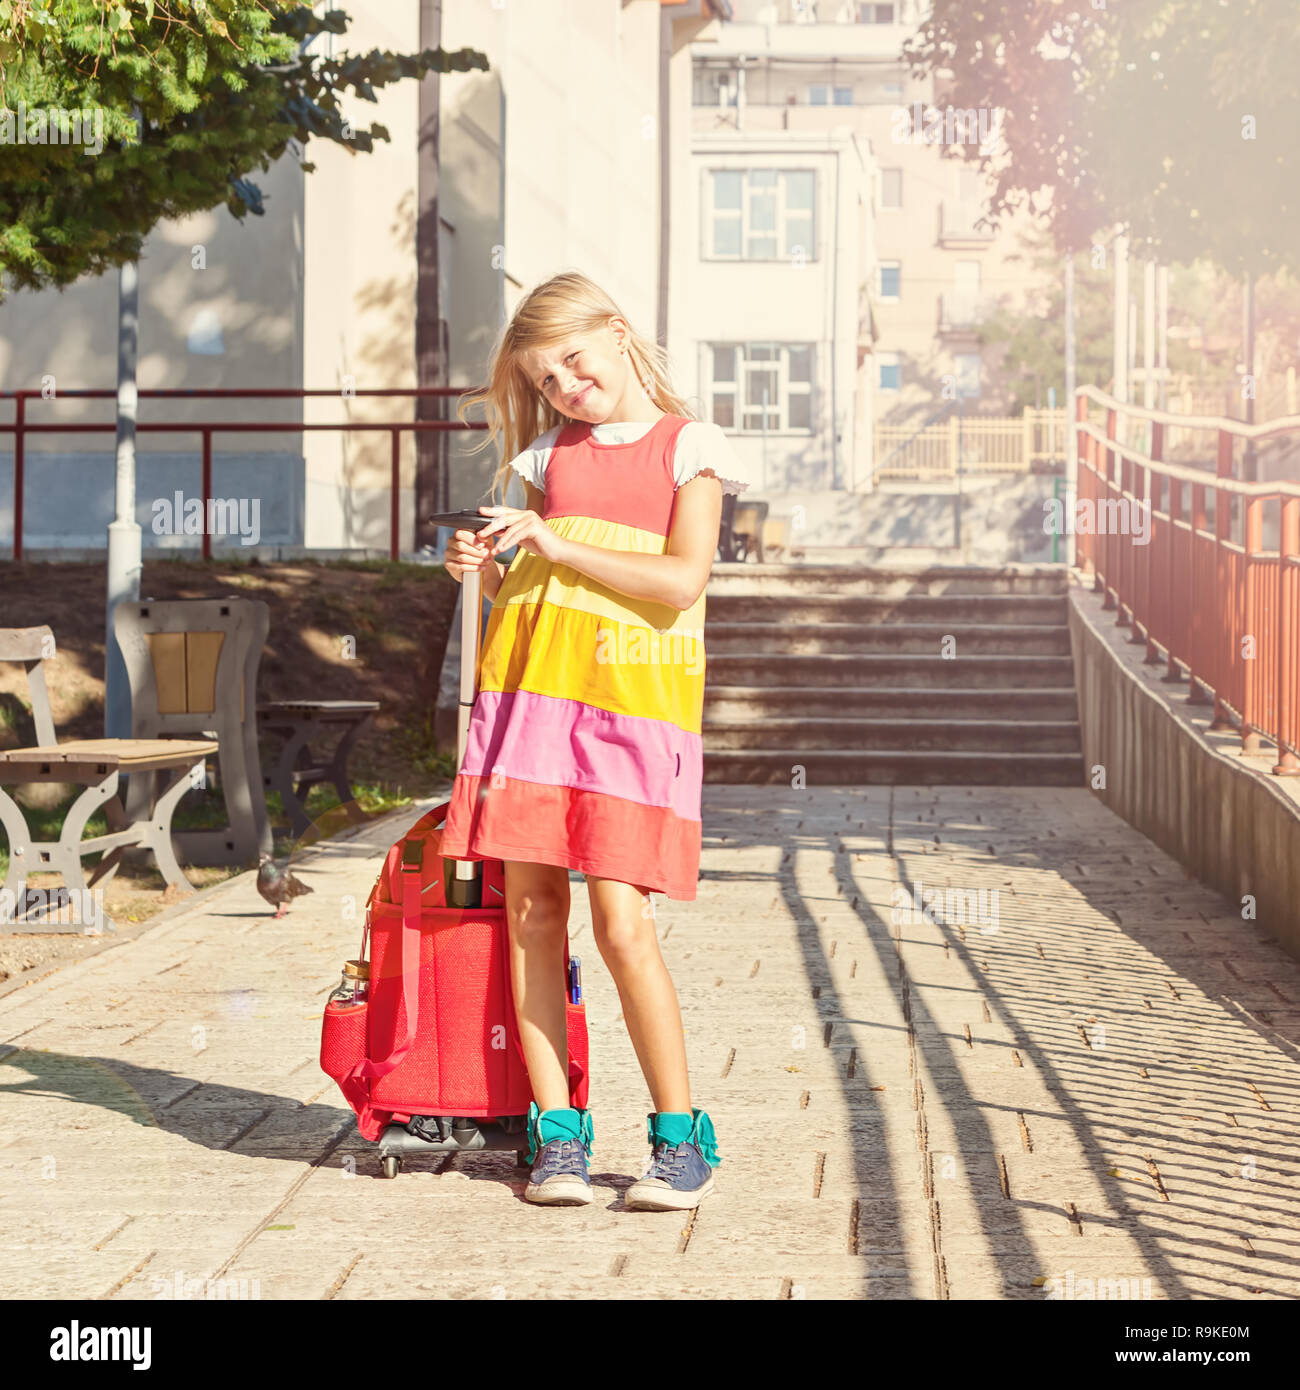 Cute 8 years old schoolgirl carries a backpack with wheels in the schoolyard Stock Photo